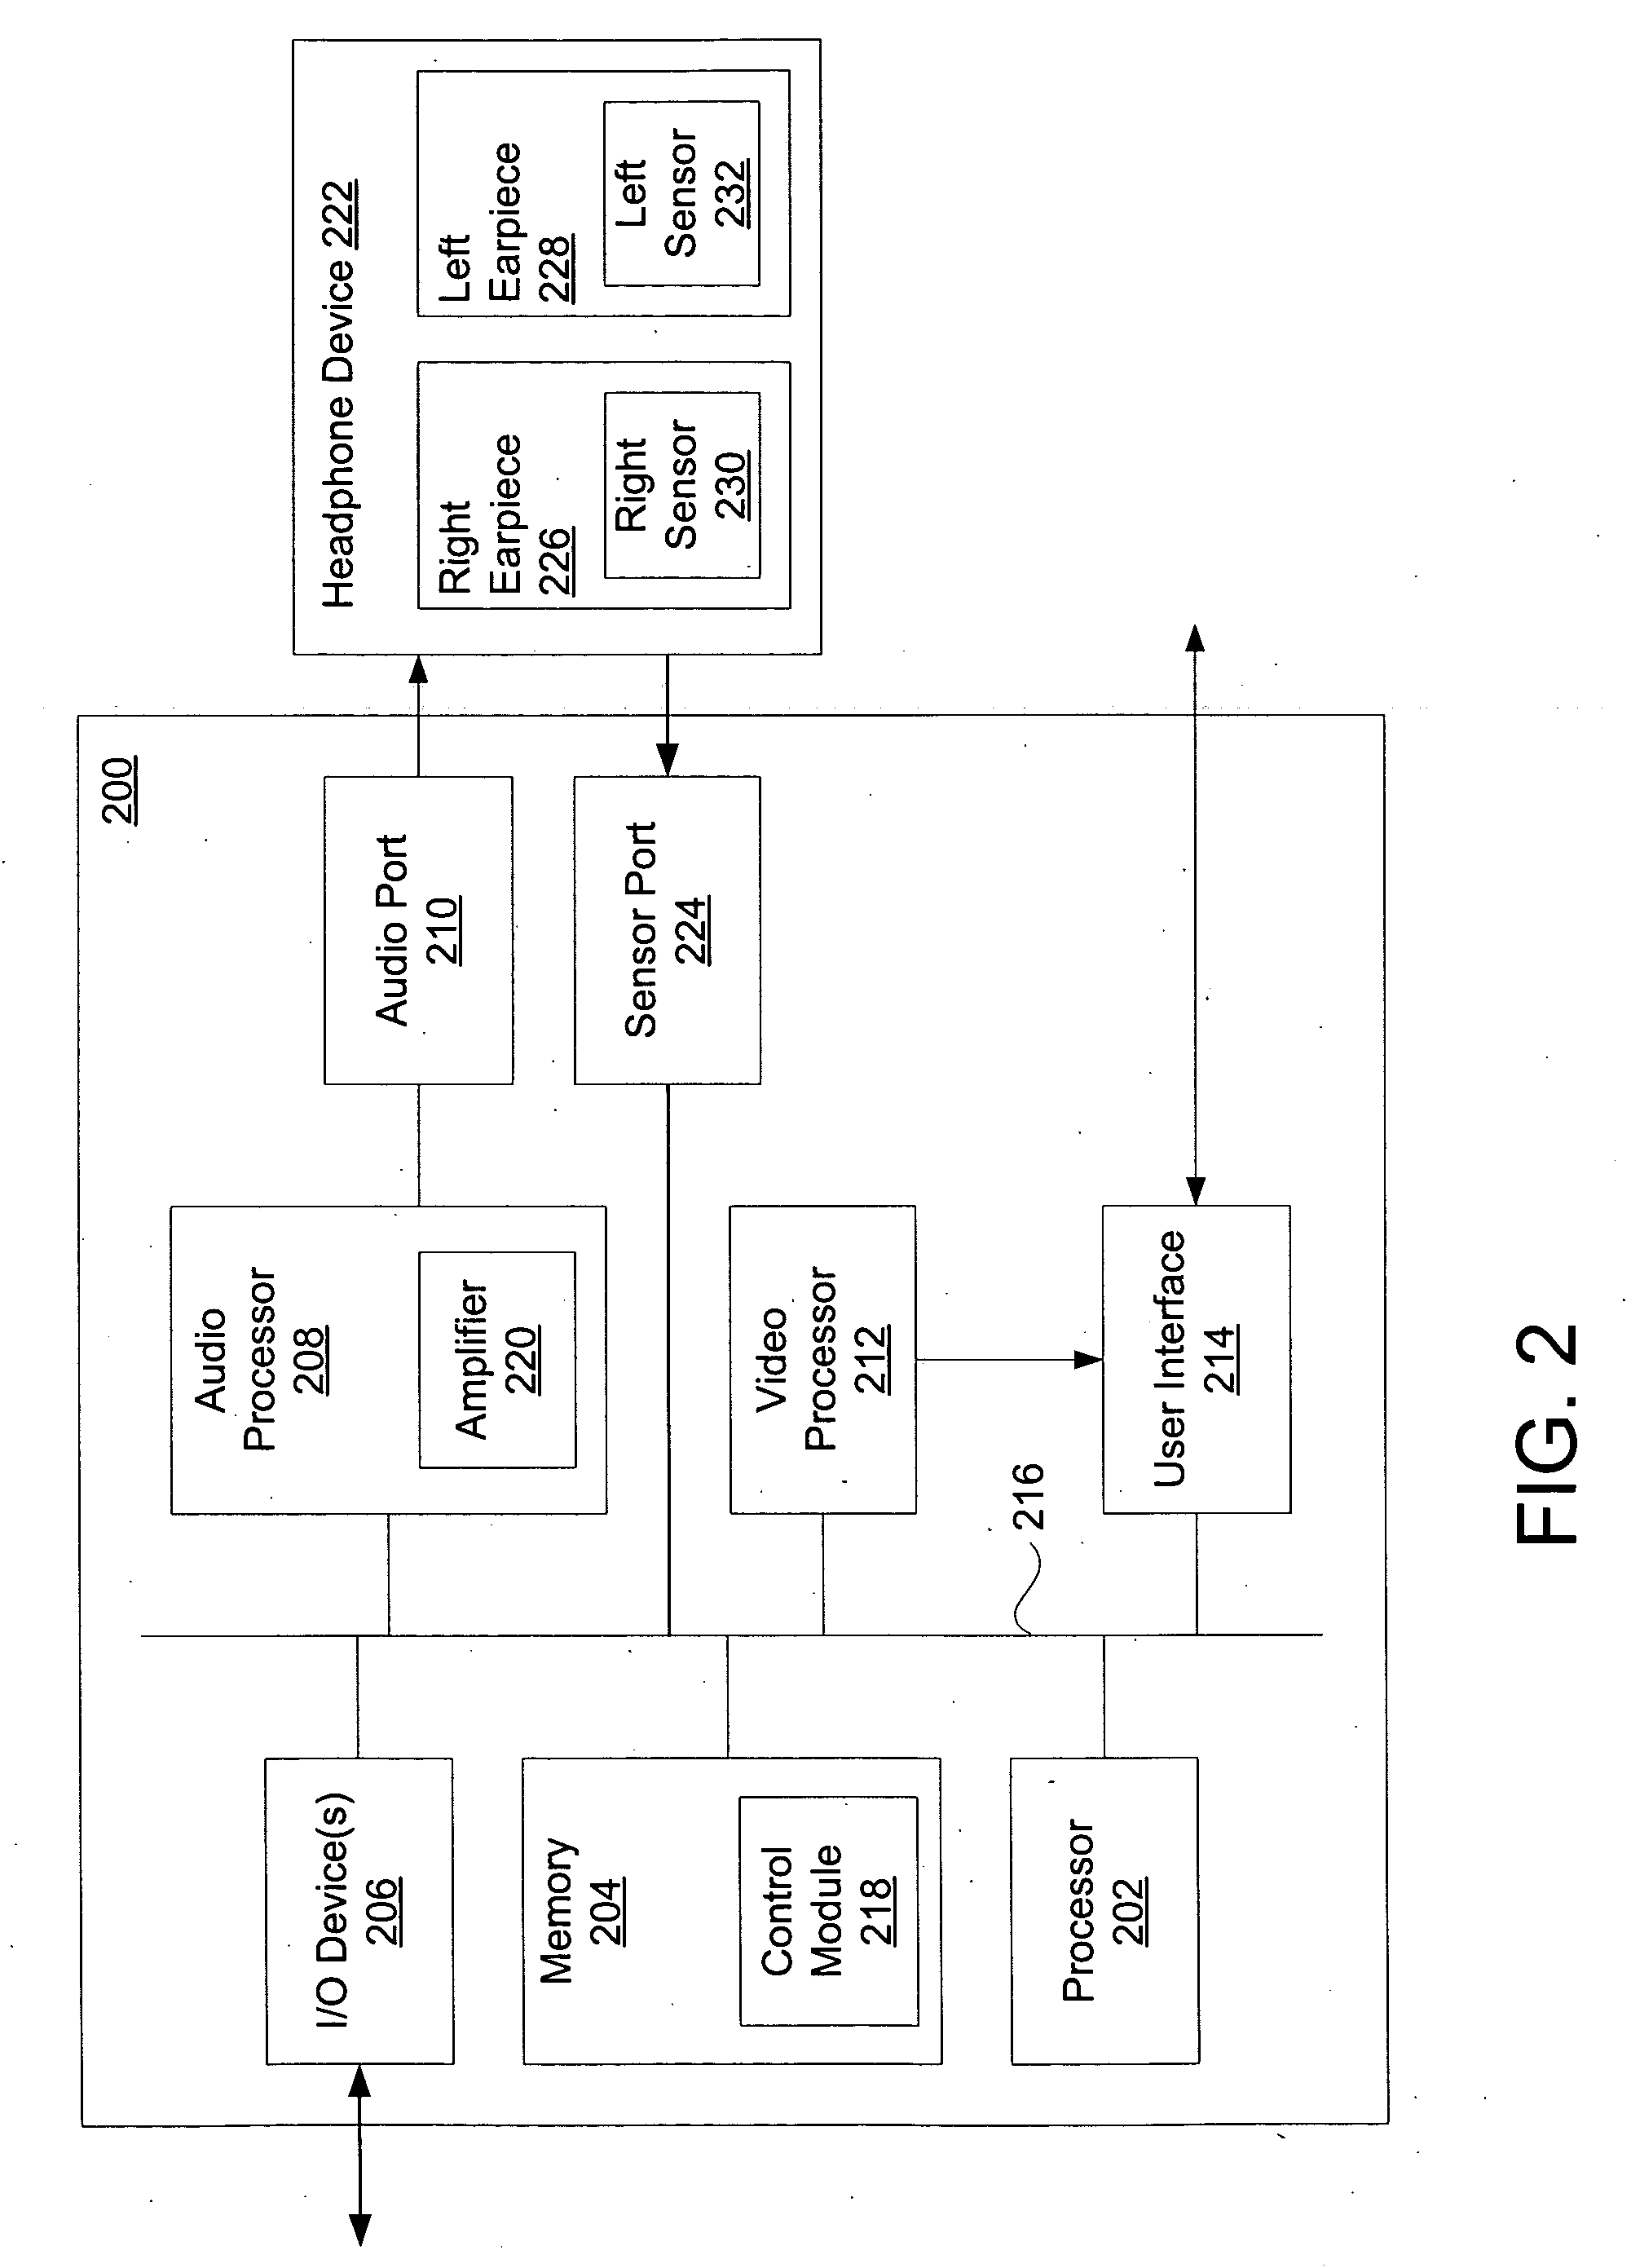 System and method for controlling states of a device